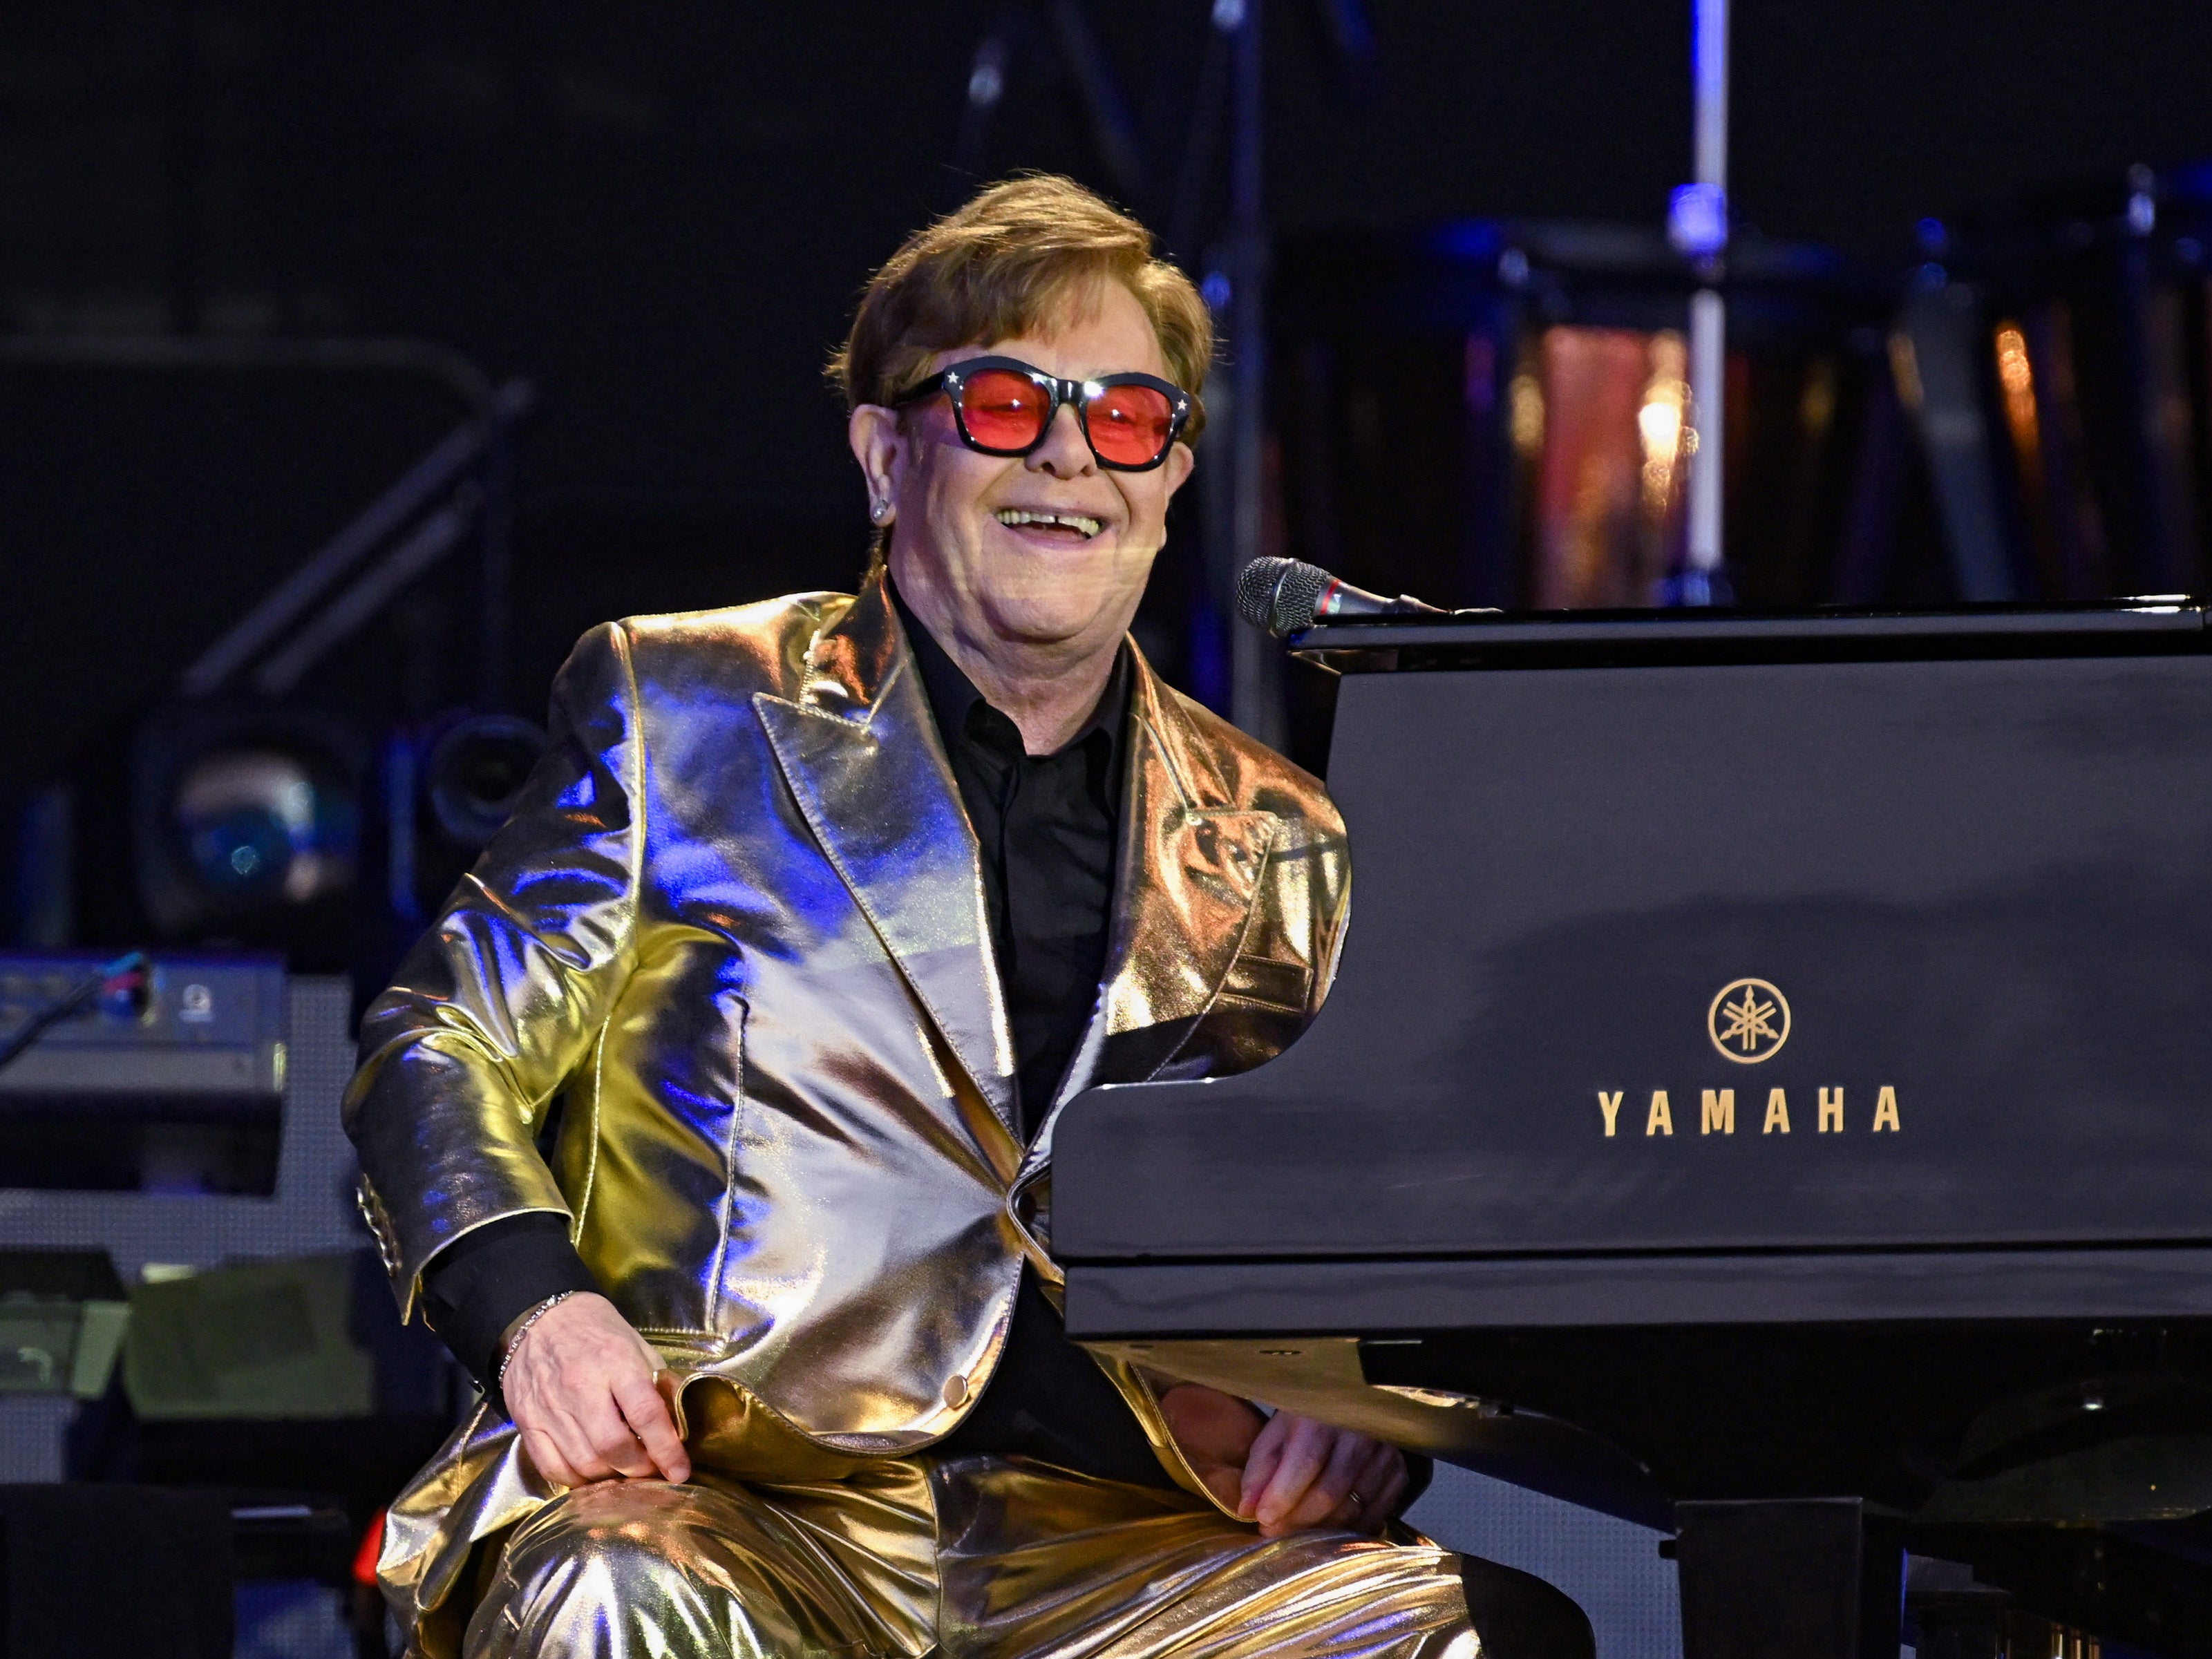 Elton John brought a joyful sense of occasion to the day at the festival on Sunday